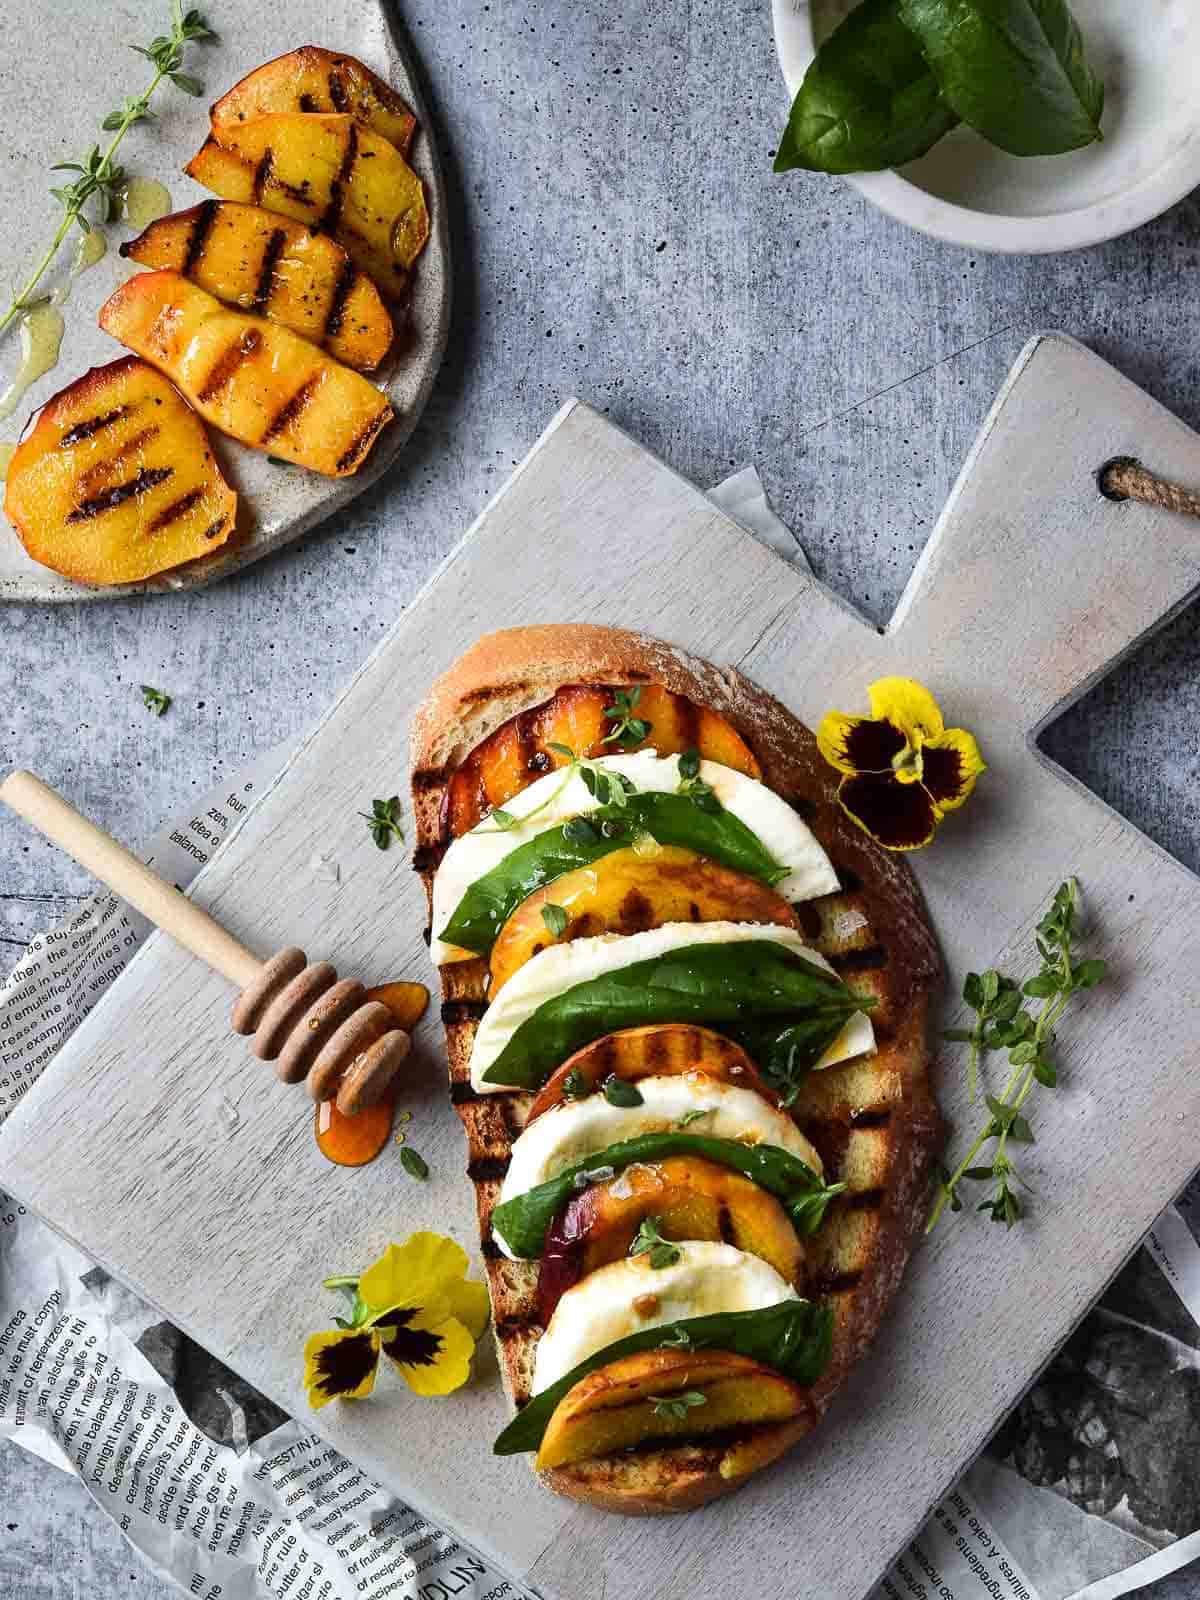 Overhead view of toast with grilled peaches on it layered with mozzerella, basil and balsamic vinegar on a grey cutting board